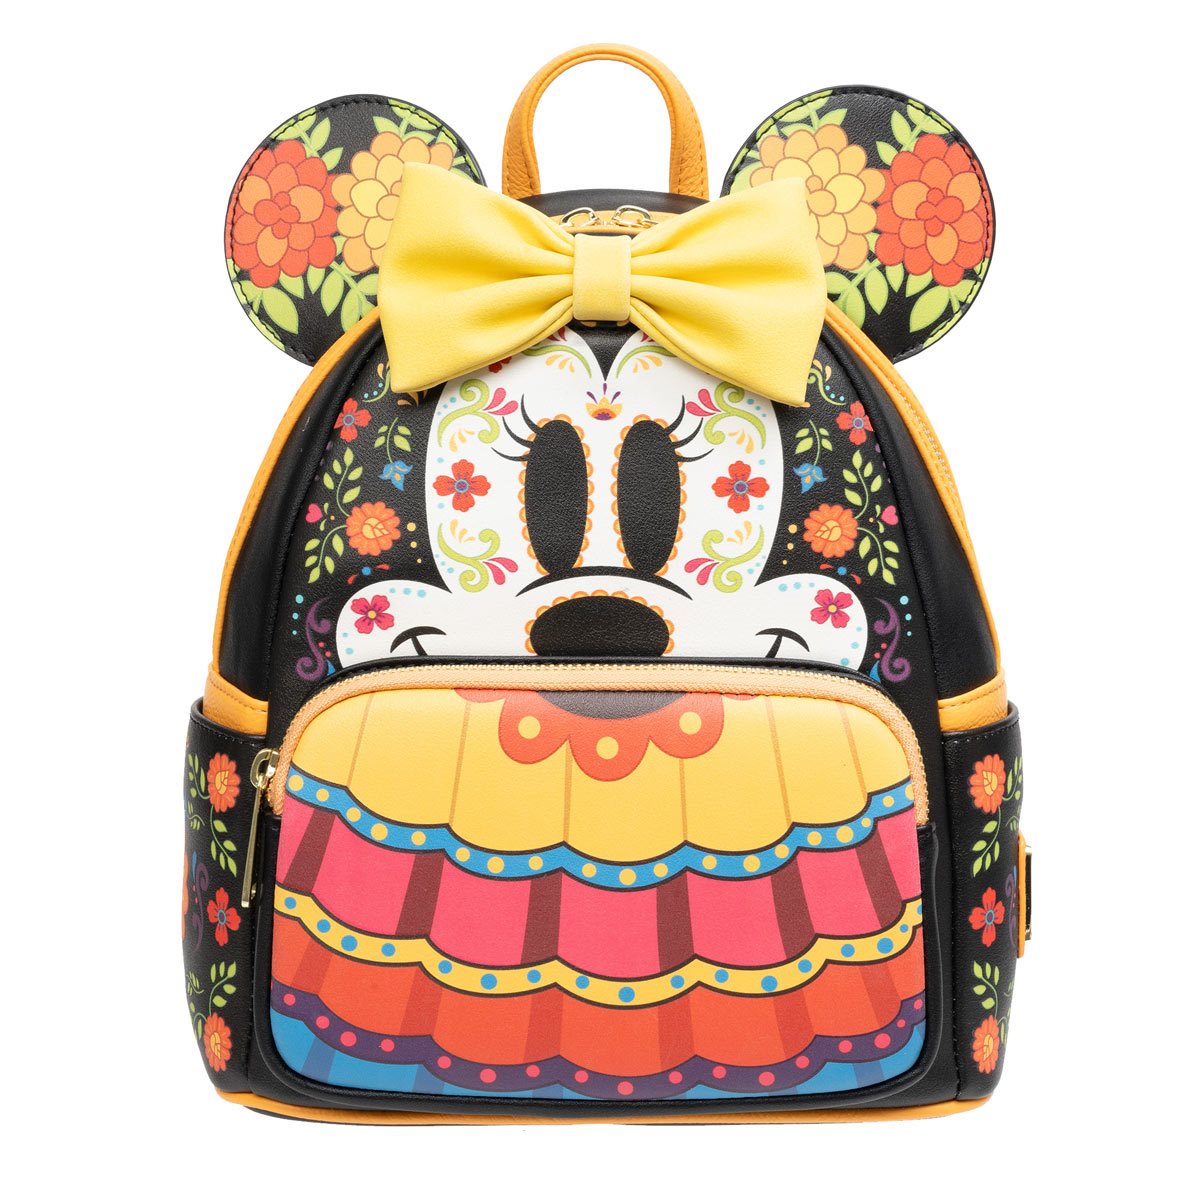 Personalized Minnie Mouse Made You Smile Character Backpack - 16 Inch